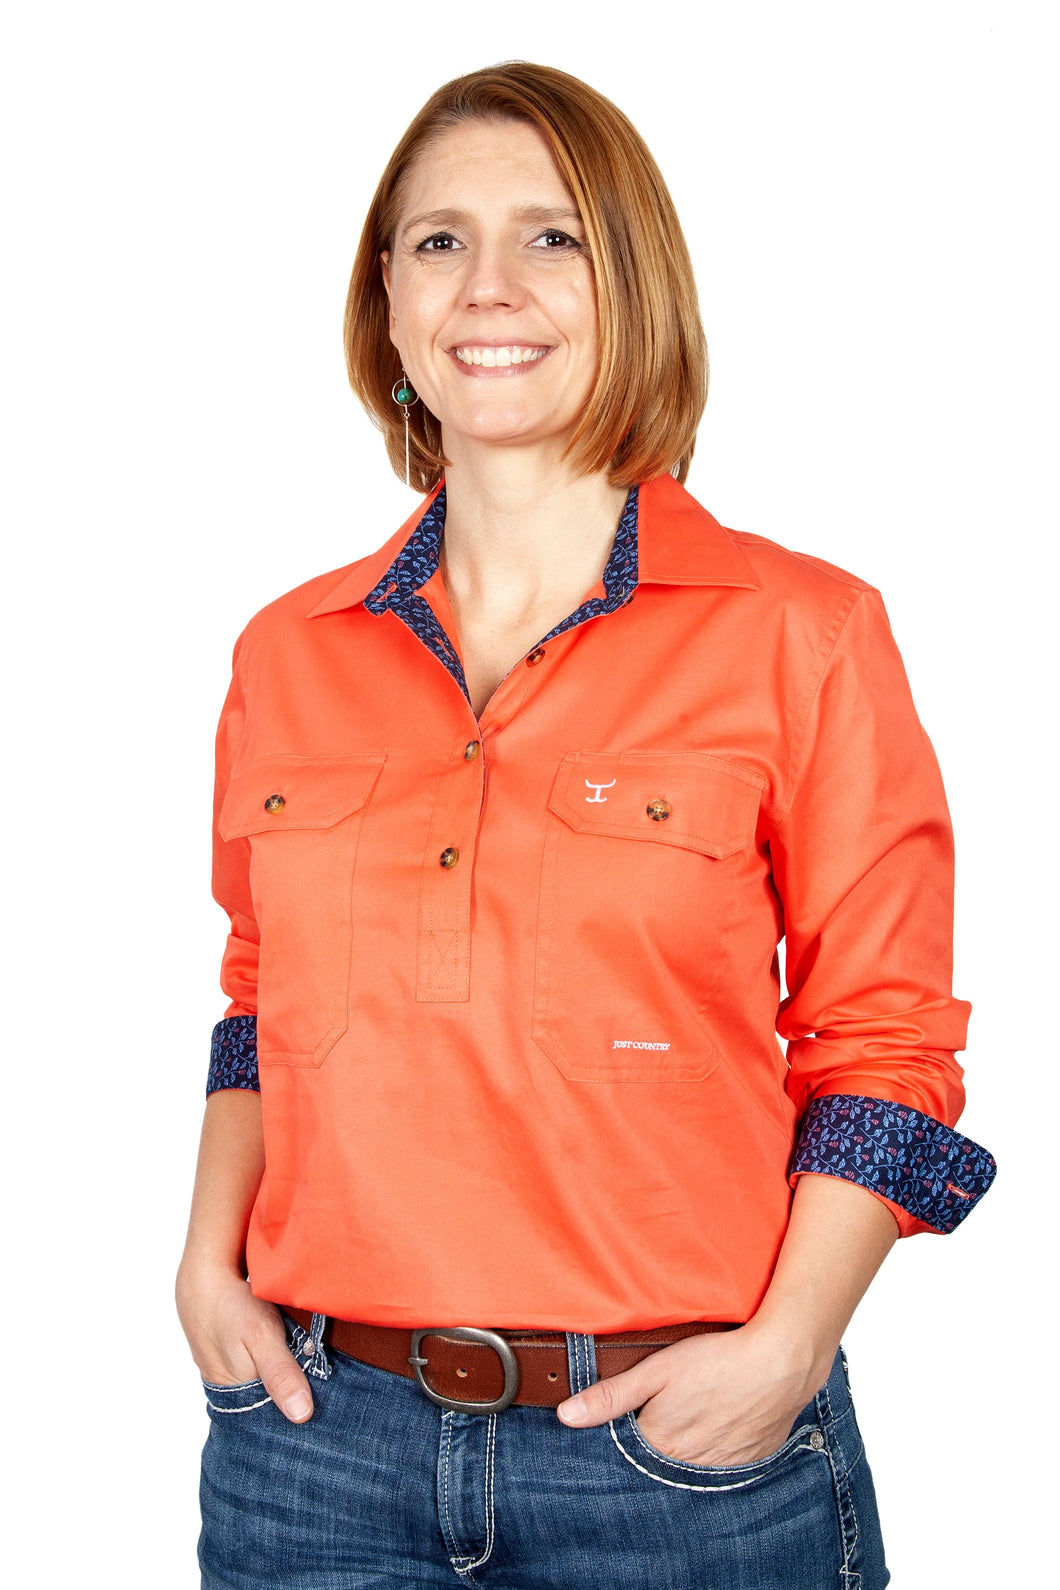 Just Country - Jahna Trim Half Button Solid Workshirt - Hot Coral/Navy Dandelions -18